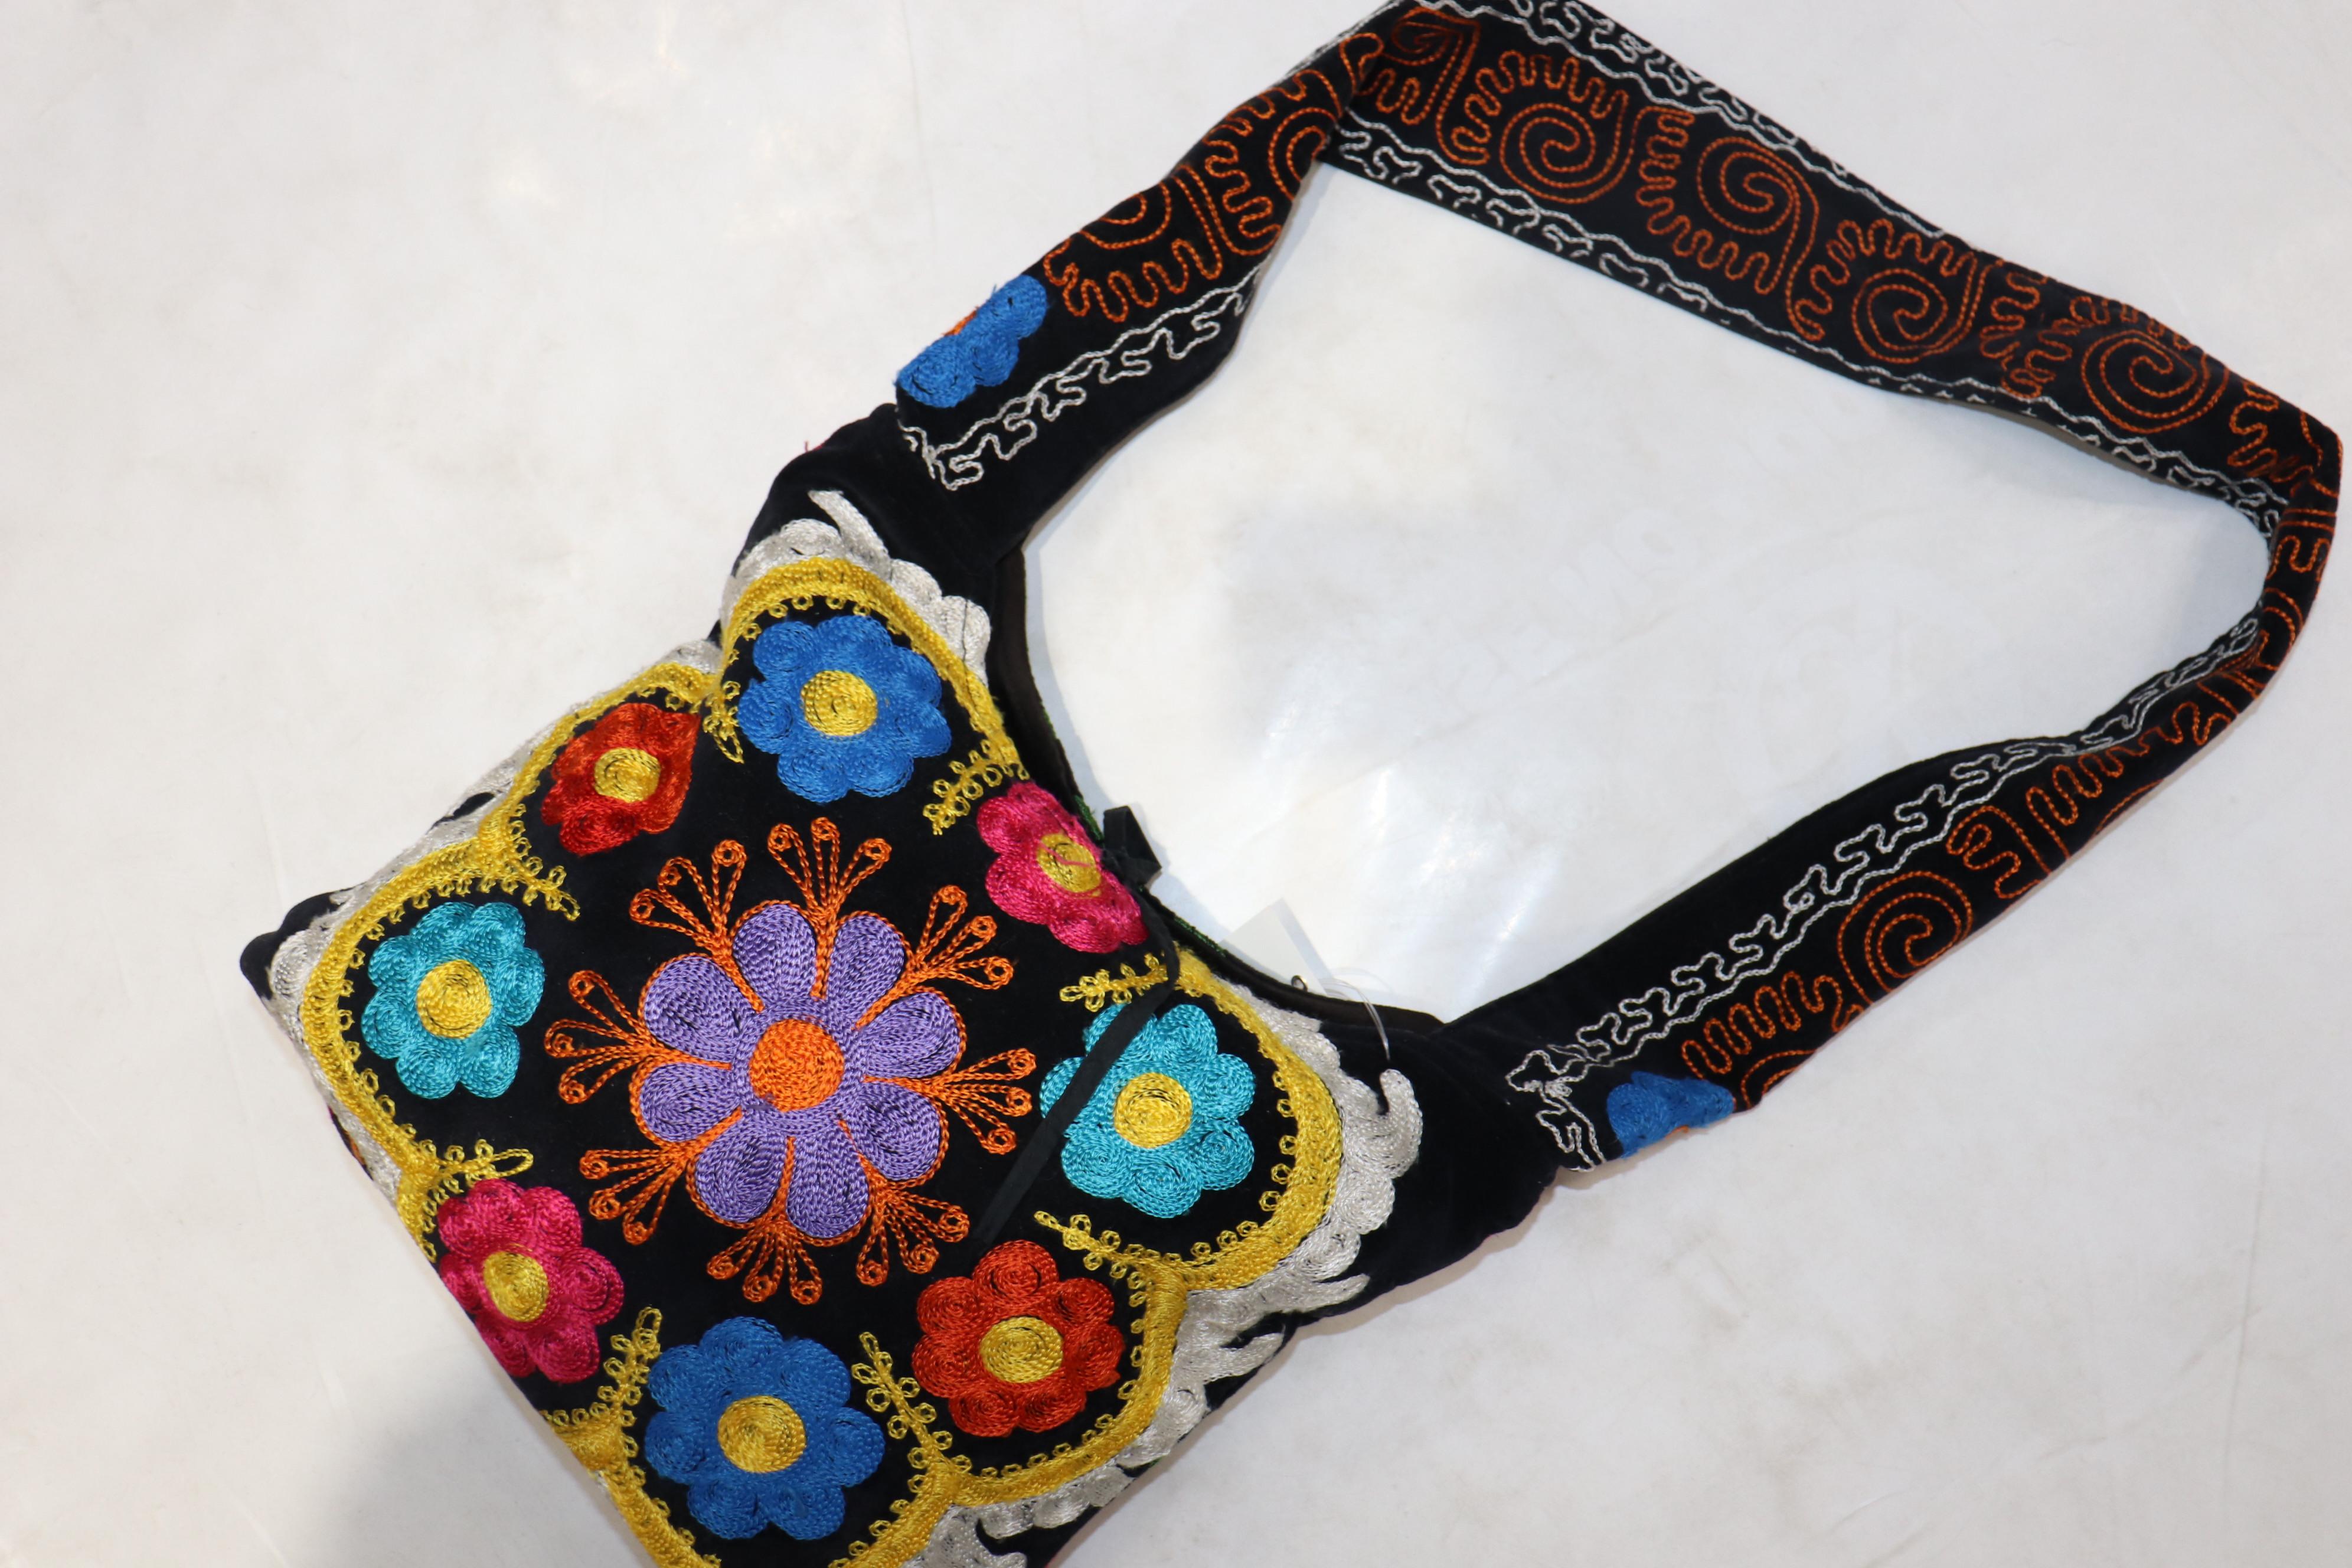 Suzanni Embroidered Textile Handbag In Good Condition For Sale In New York, NY